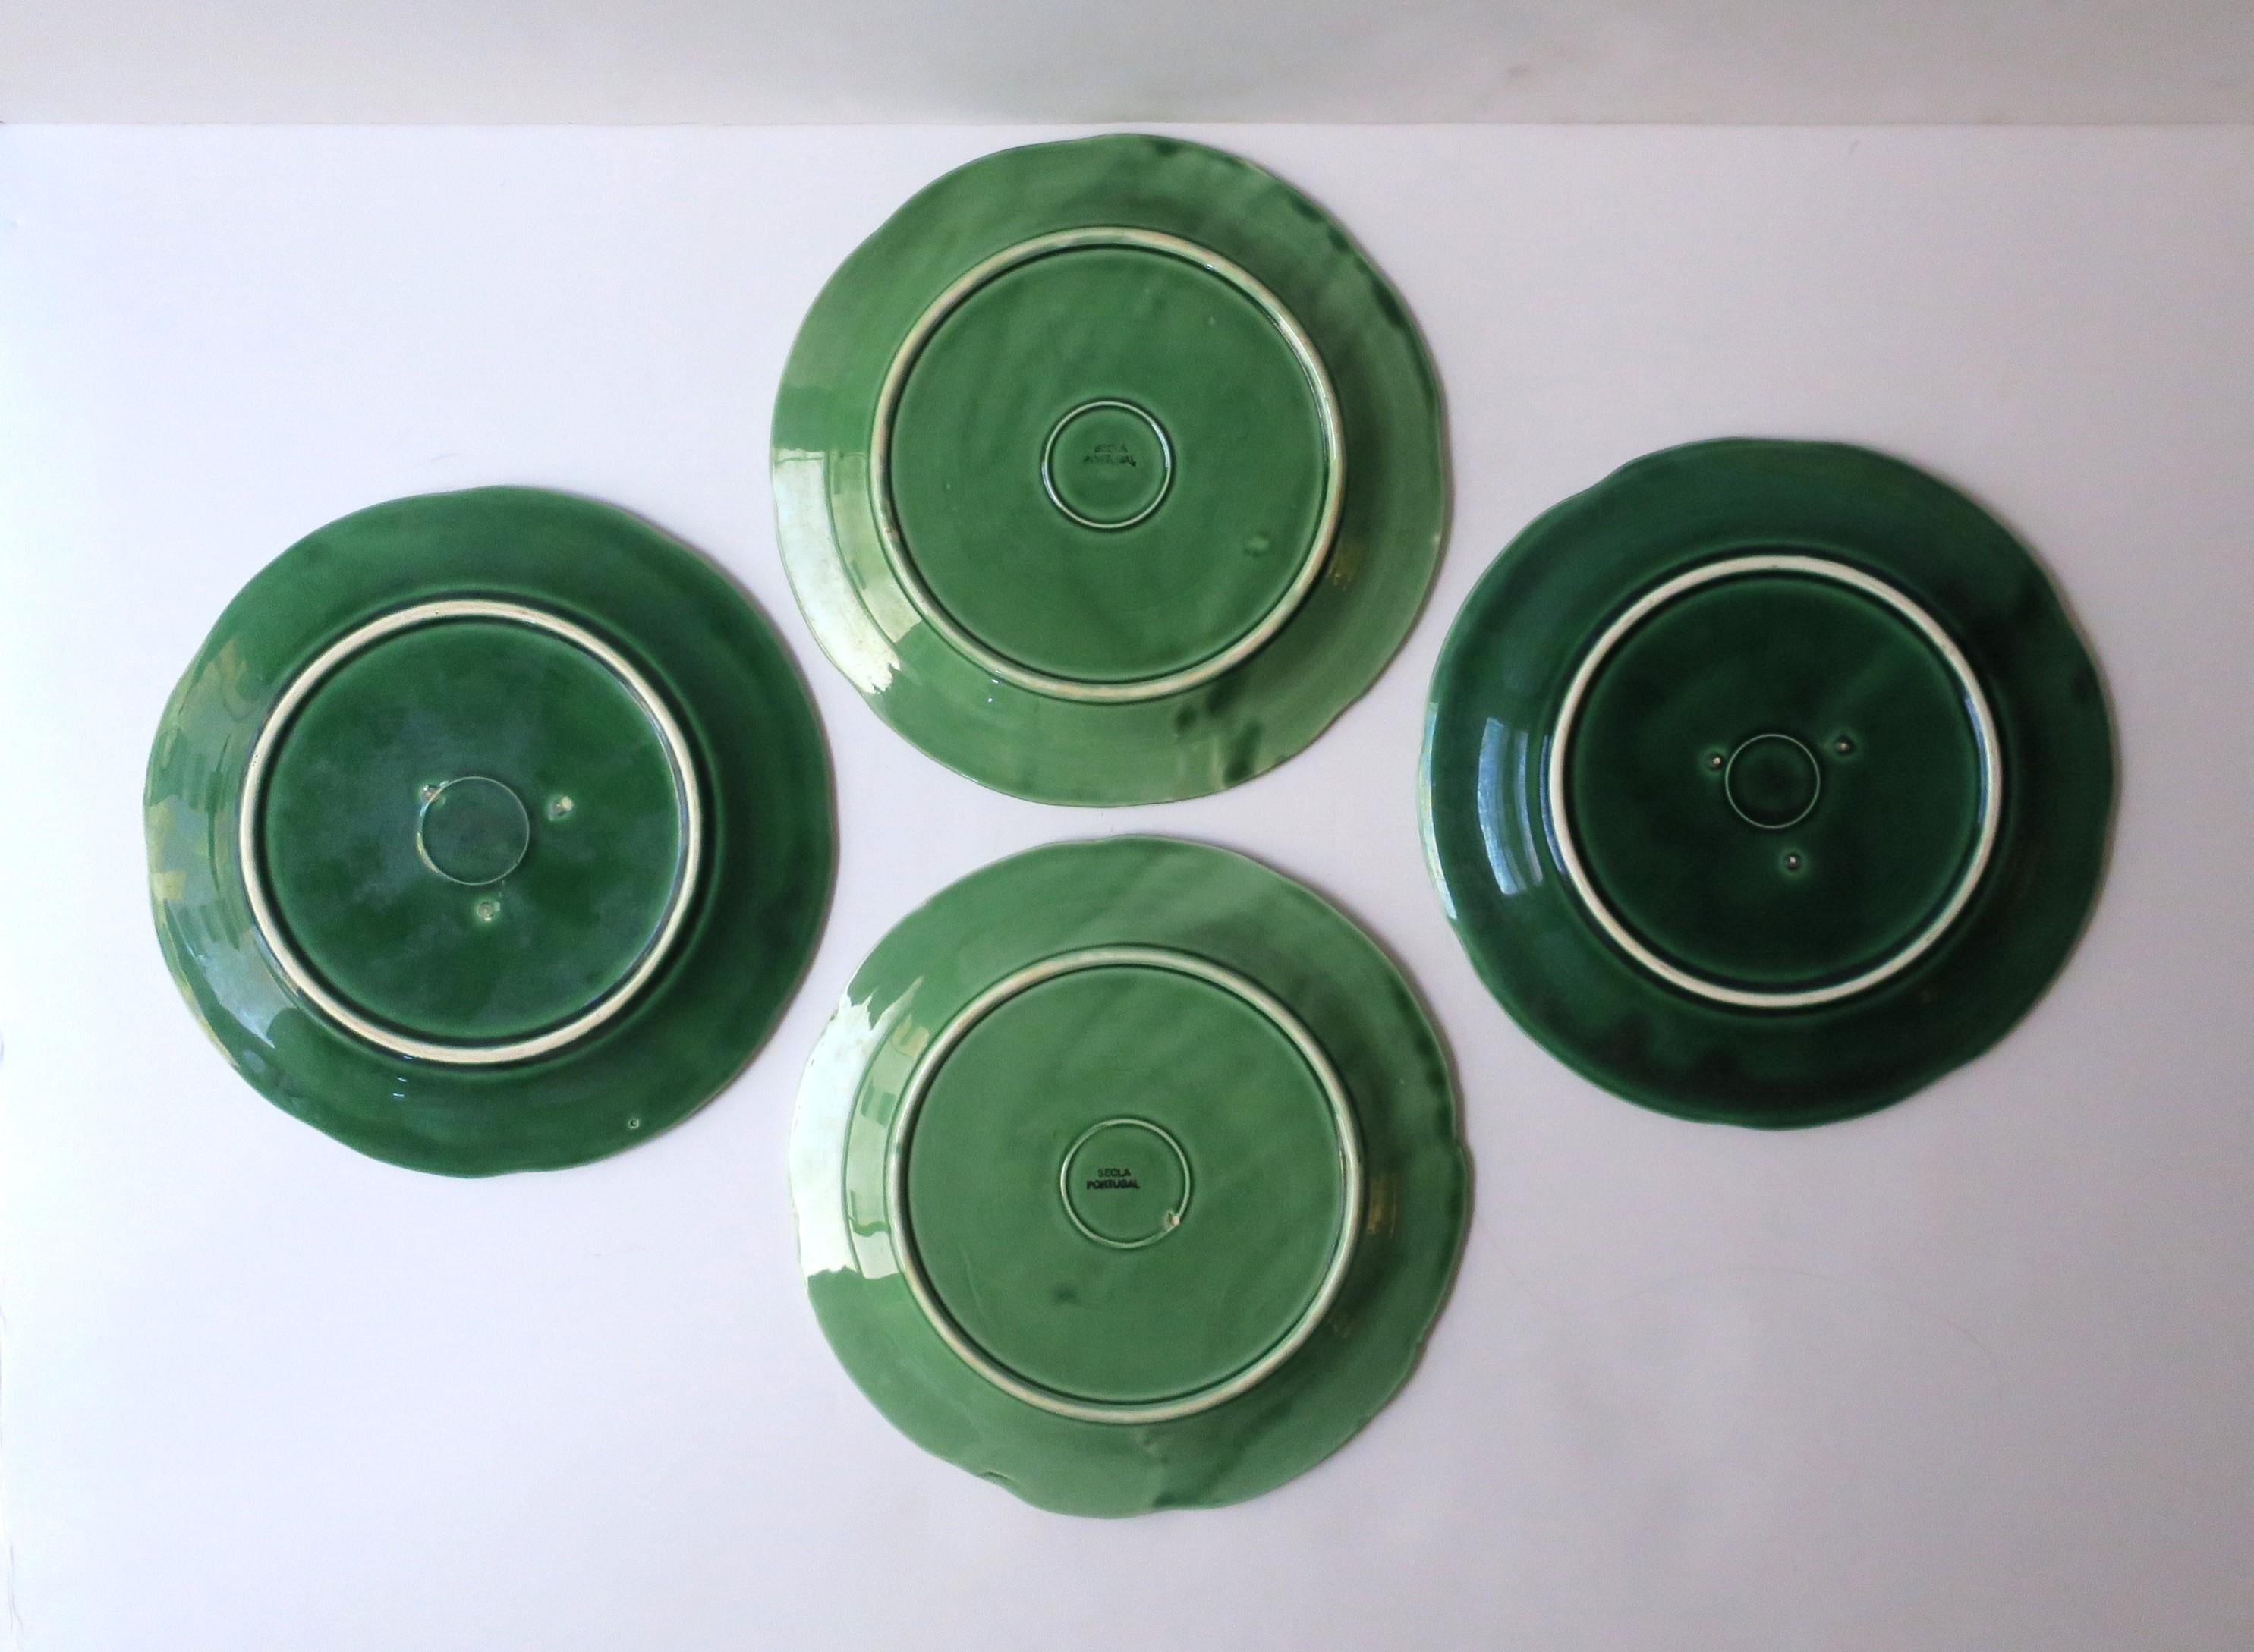 Lettuce or Cabbage Leaf Plates Green and White, Set of 4 For Sale 2